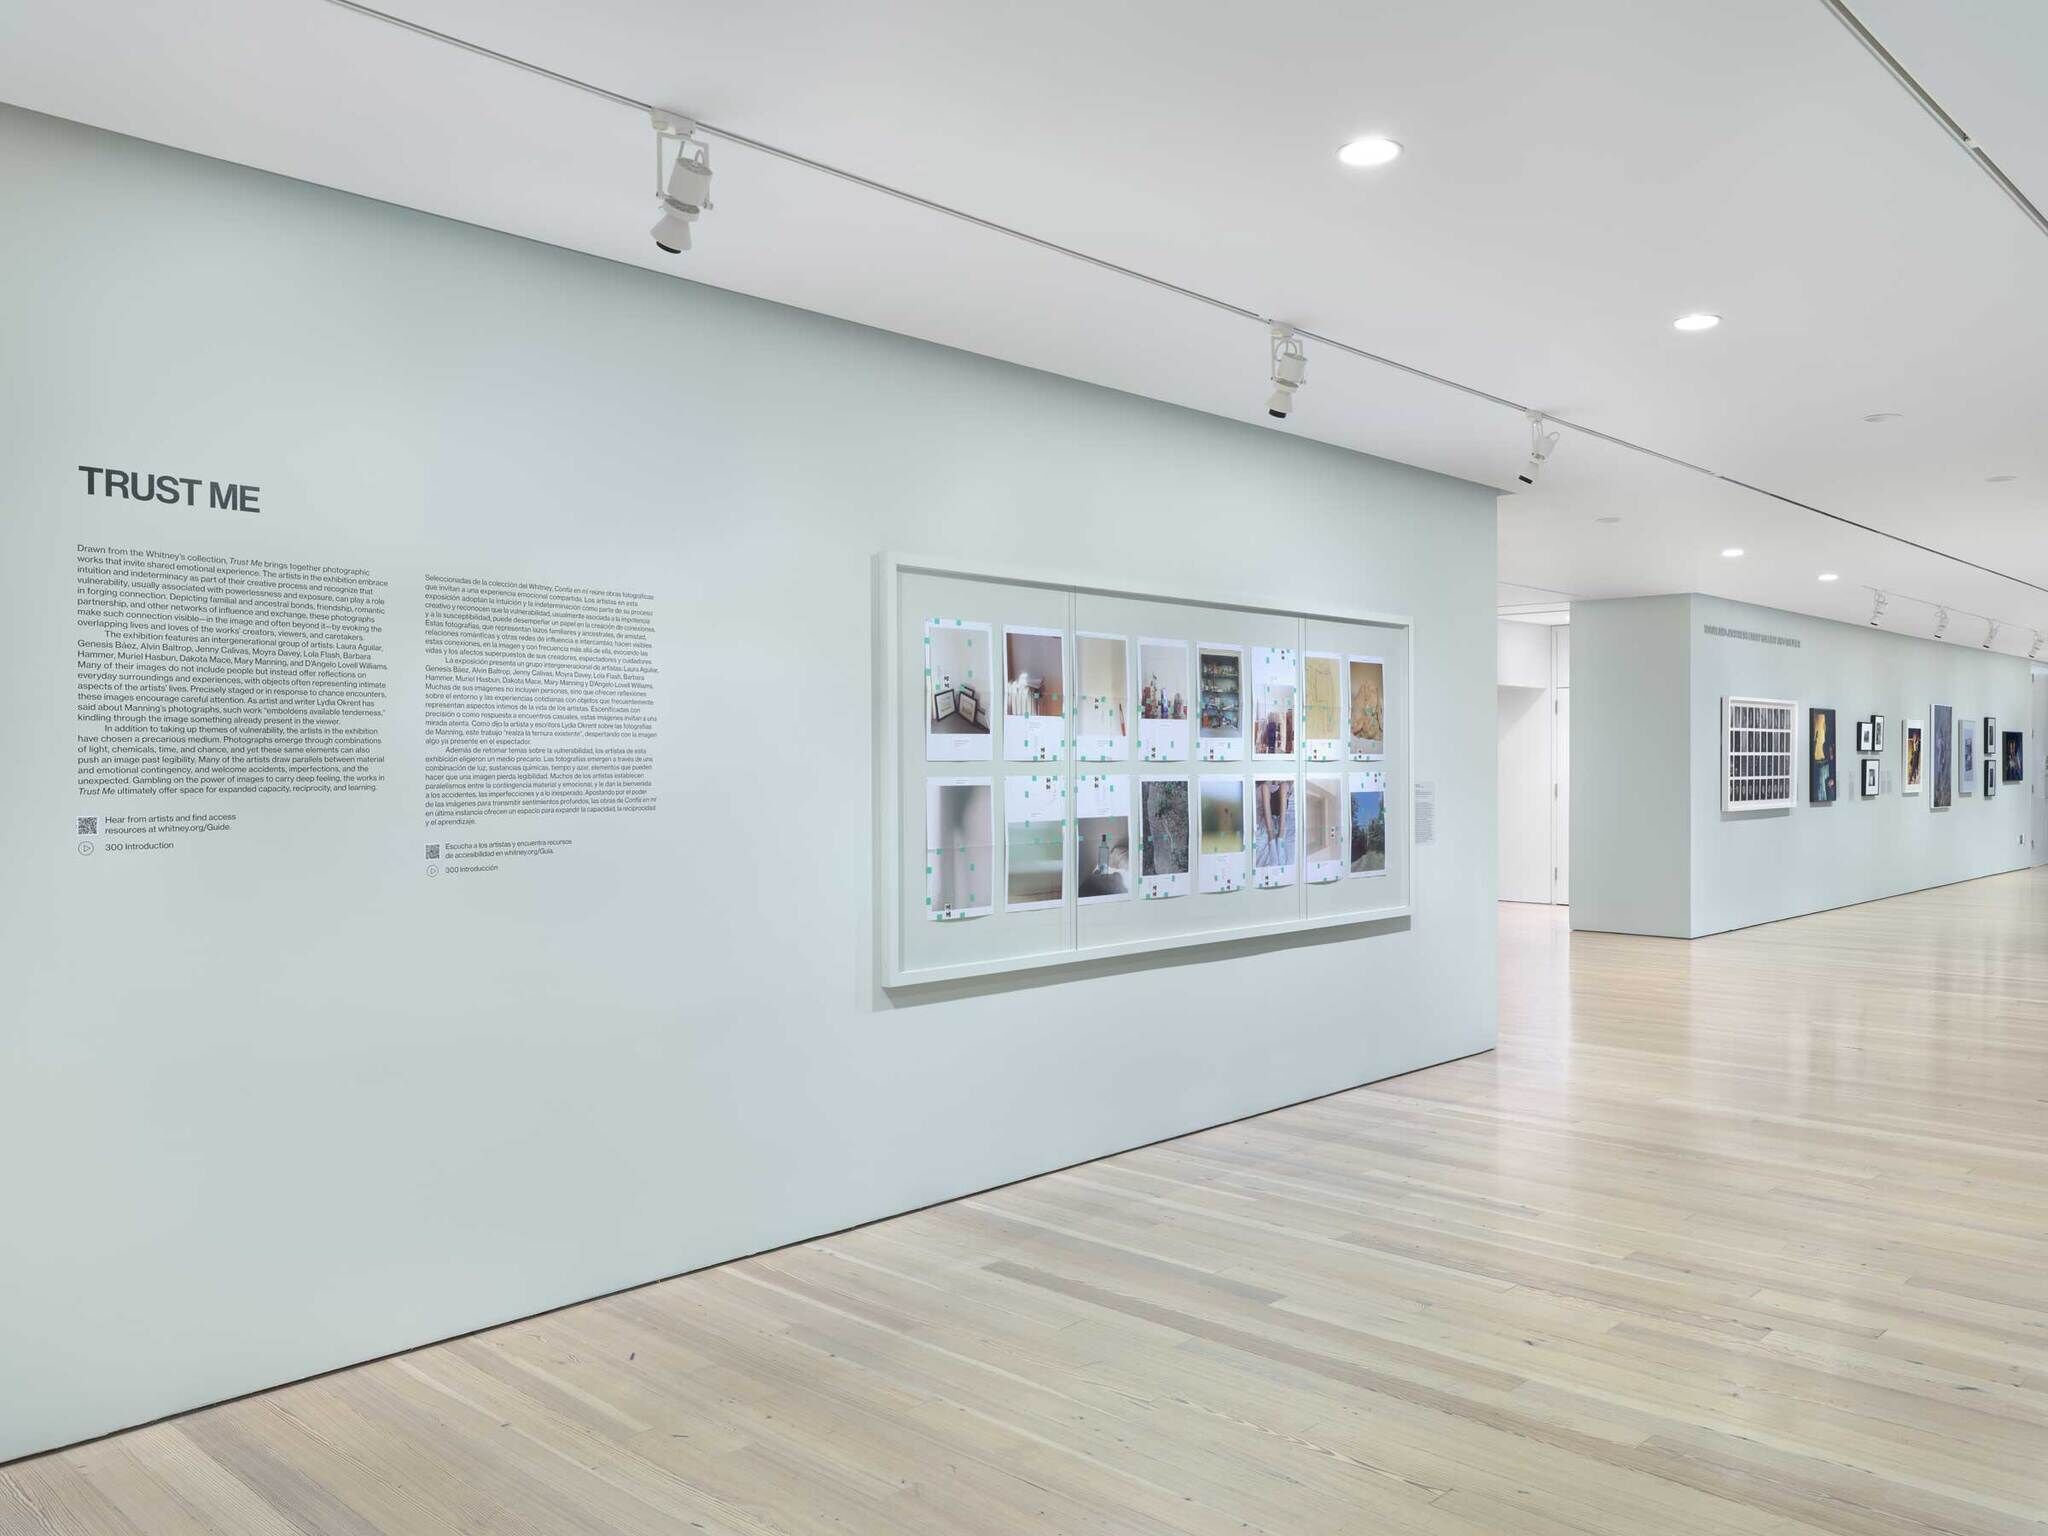 A picture of a hallway with the words Trust Me and text on the wall, and photographs displayed in a neat grid. Further down are more photographs on the wall.